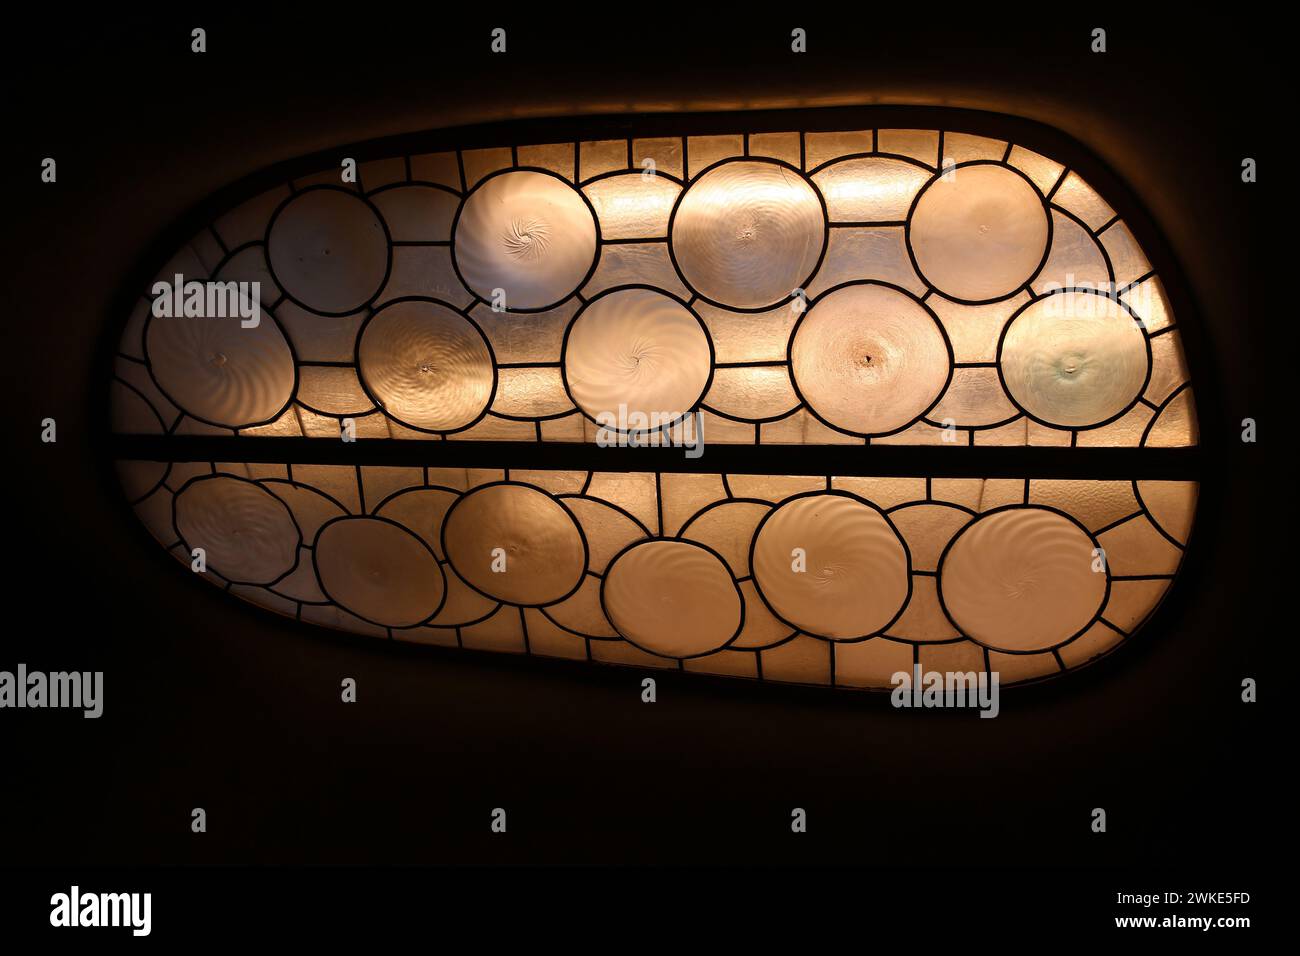 Spain. Barcelona. Casa Batlló. Remodel by Gaudí, 1904-1906. Stained glass. Stock Photo